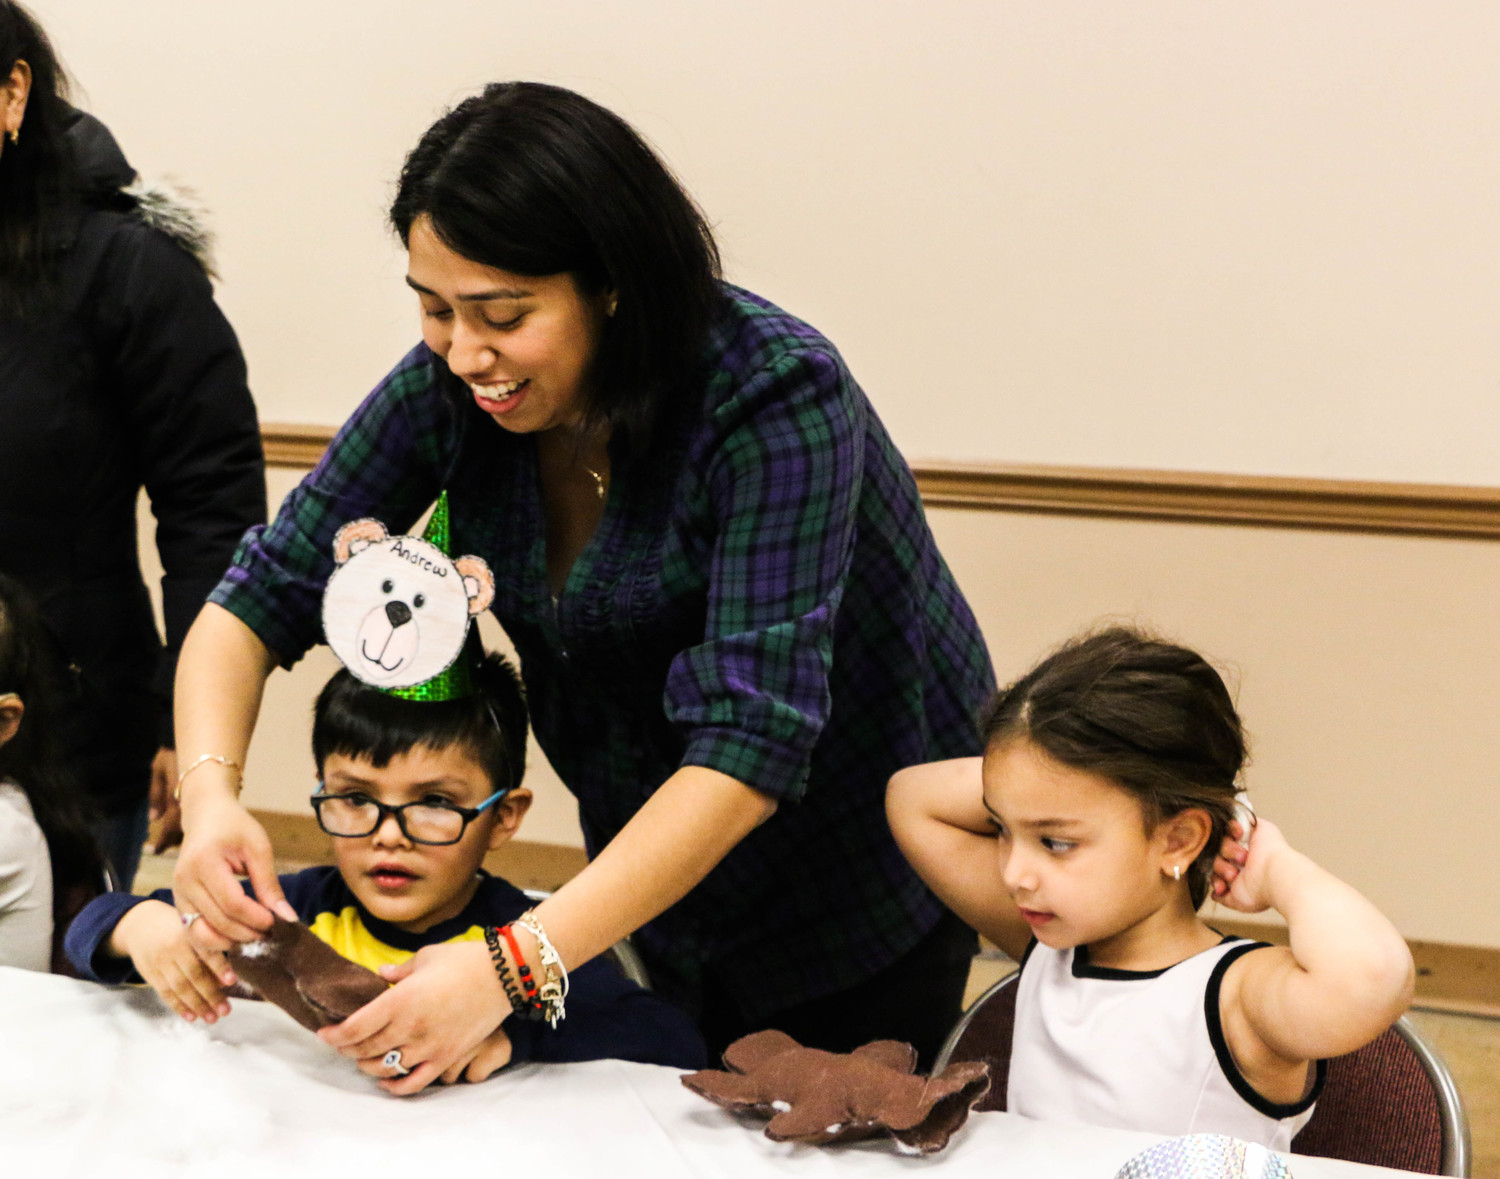 Librarian Georgina Rivas-Martinez helped Andrew Chombo, left, 4, stitch his bear, while Emily Perez, 4, right looked on.